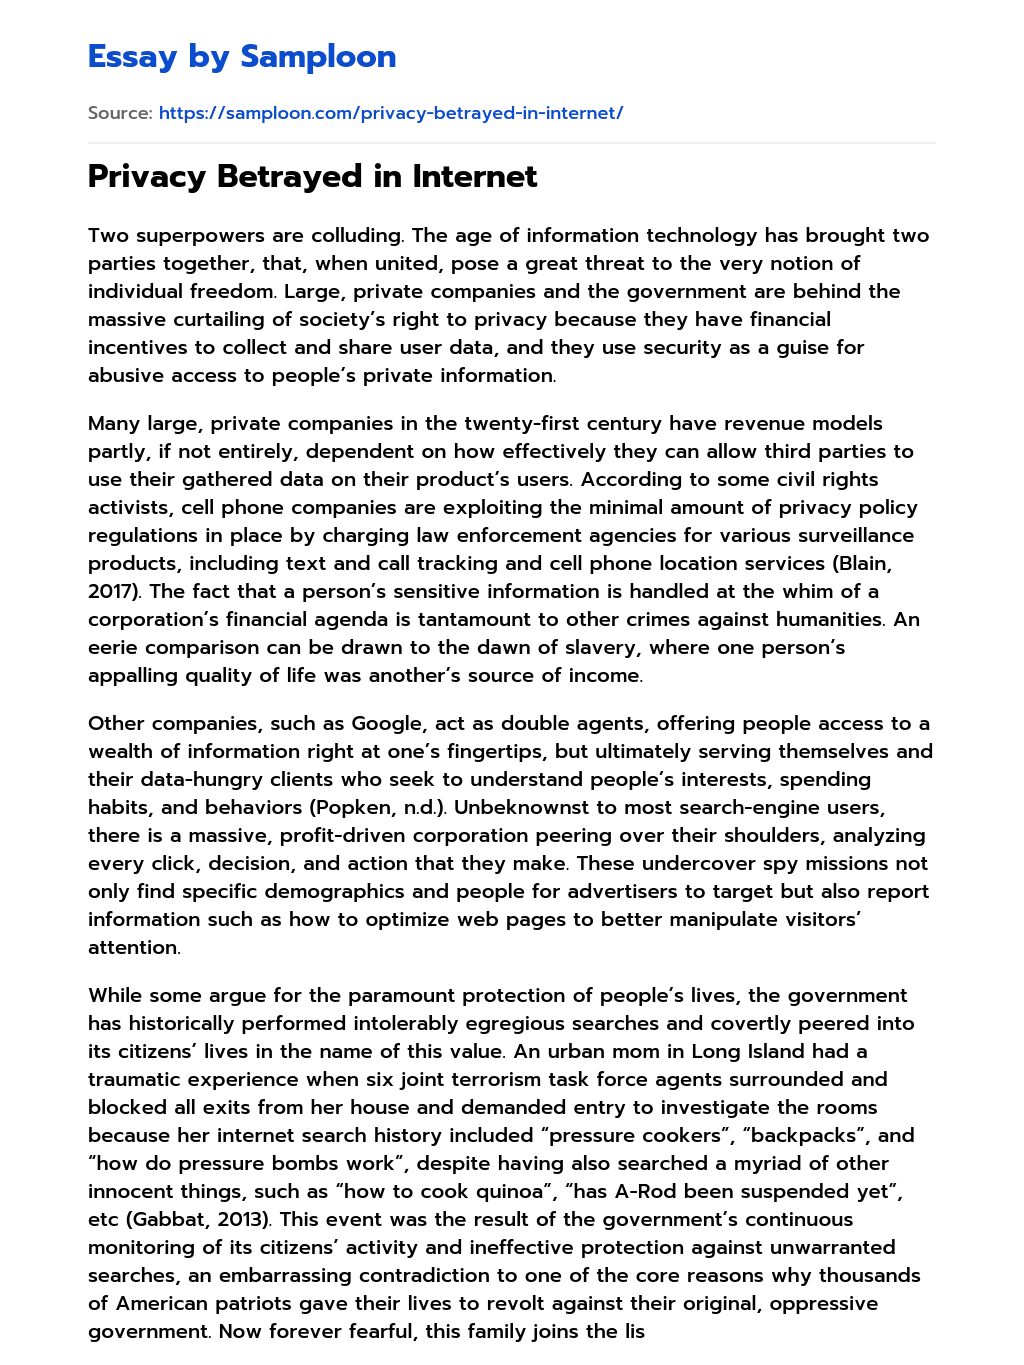 Privacy Betrayed in Internet essay